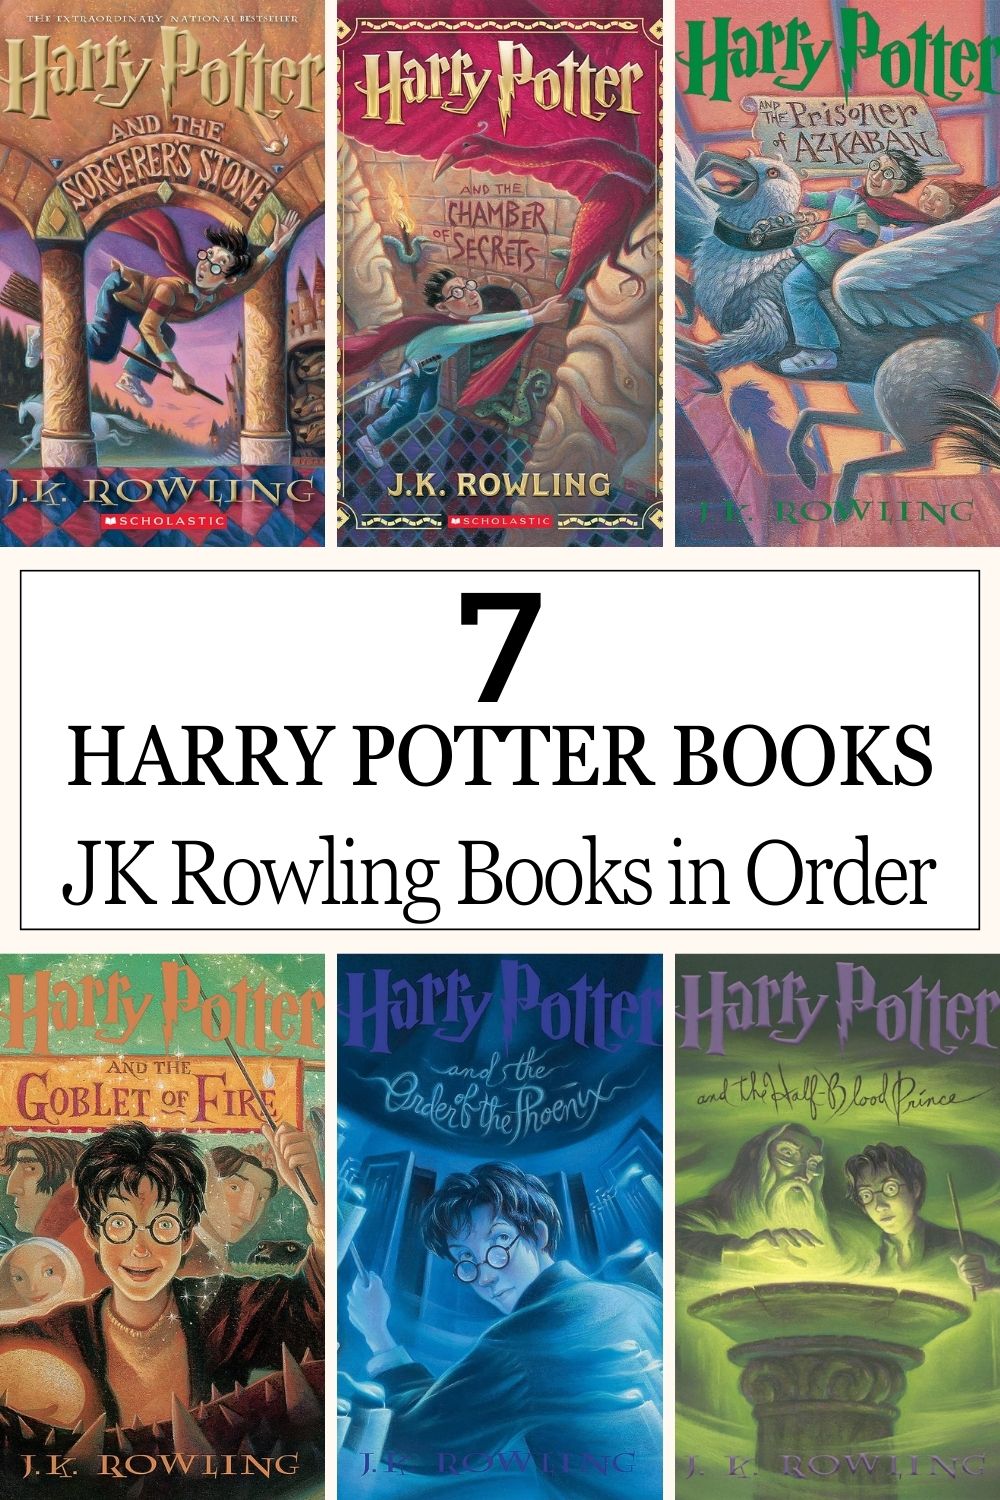 jk rowling books in order harry potter series and others